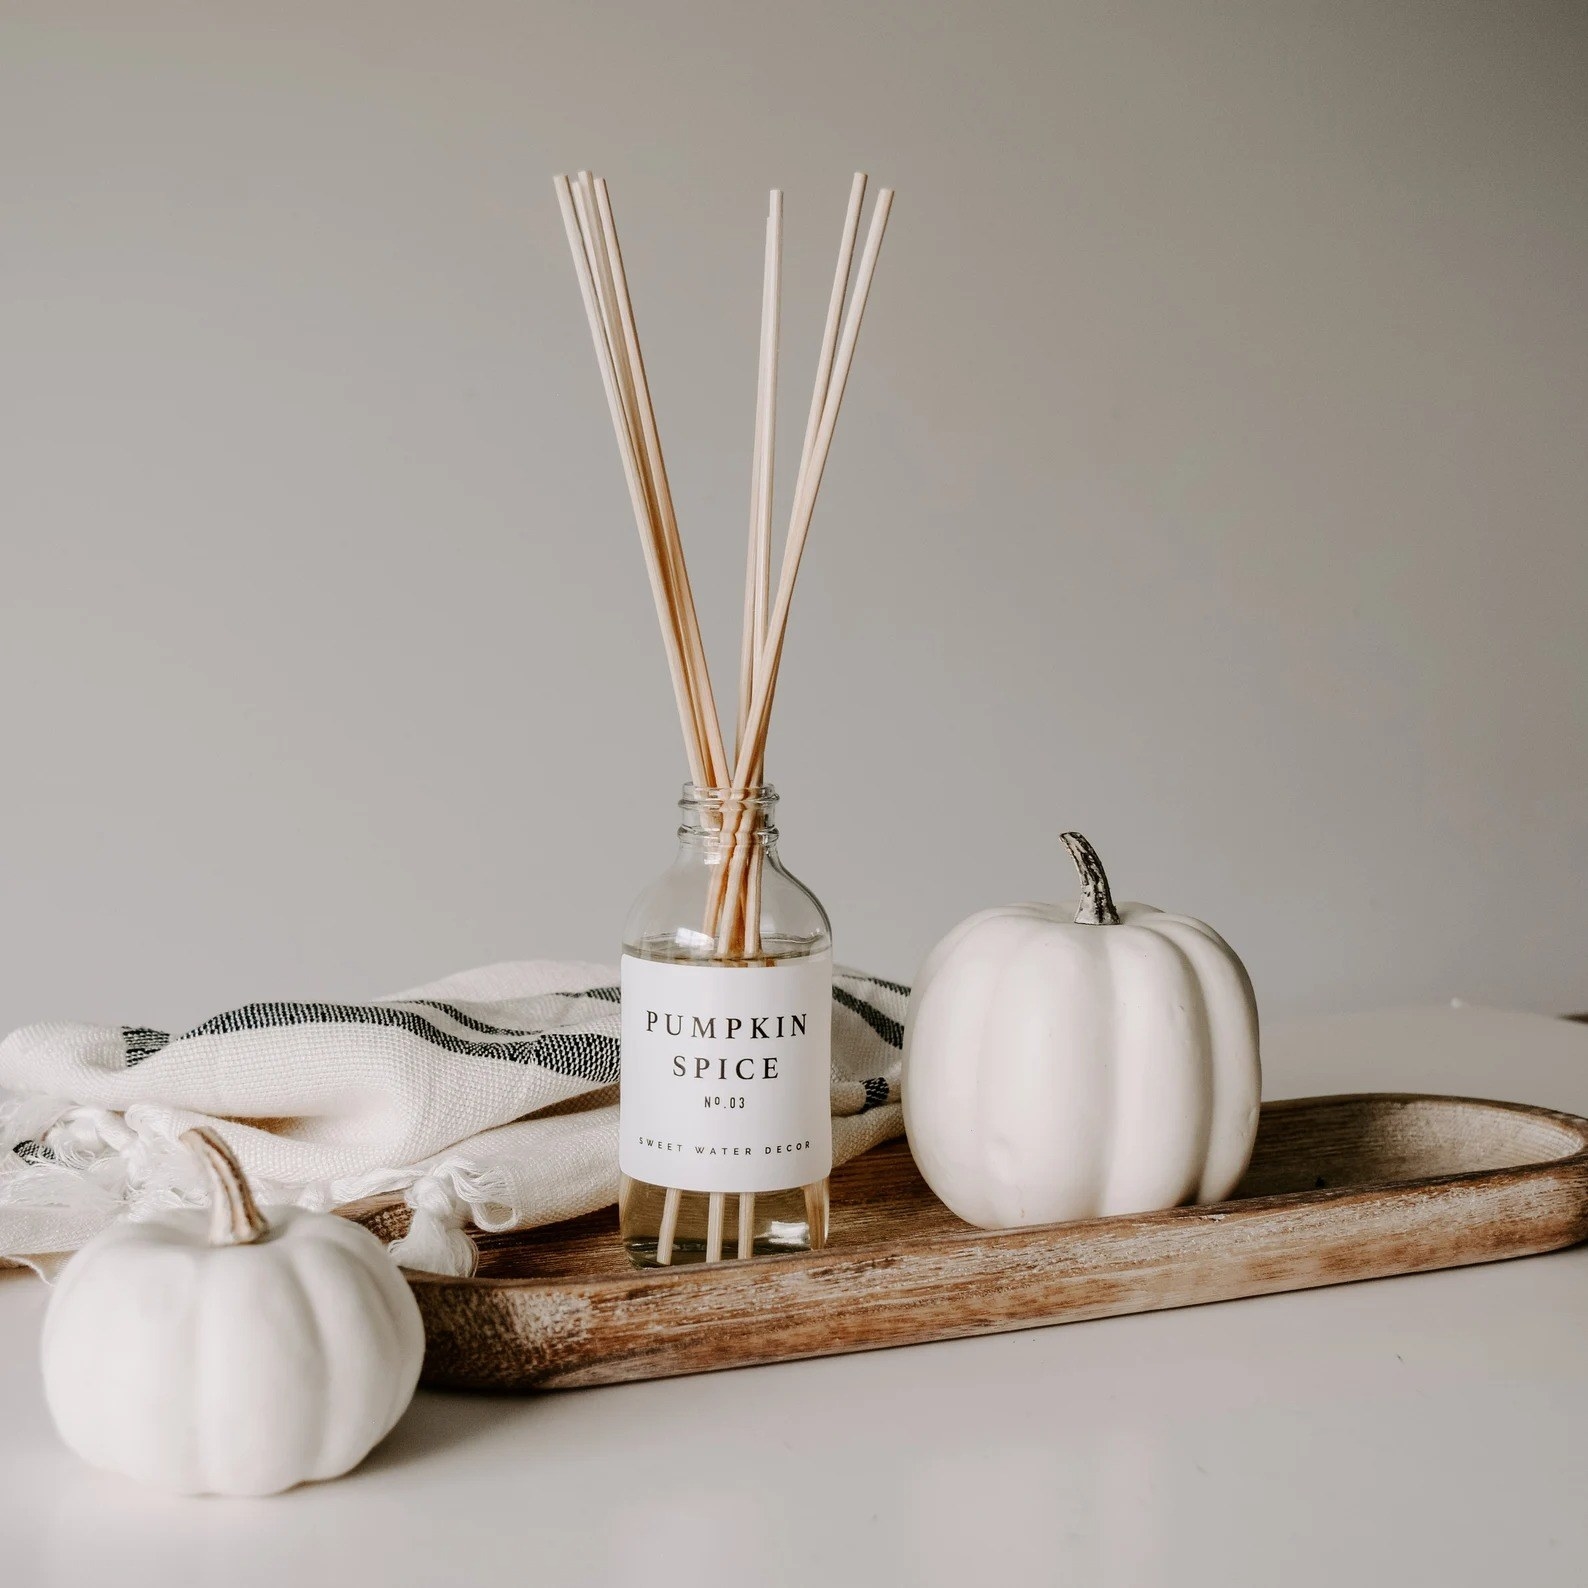 Pumpkin Spice reed diffuser placed on decor tray